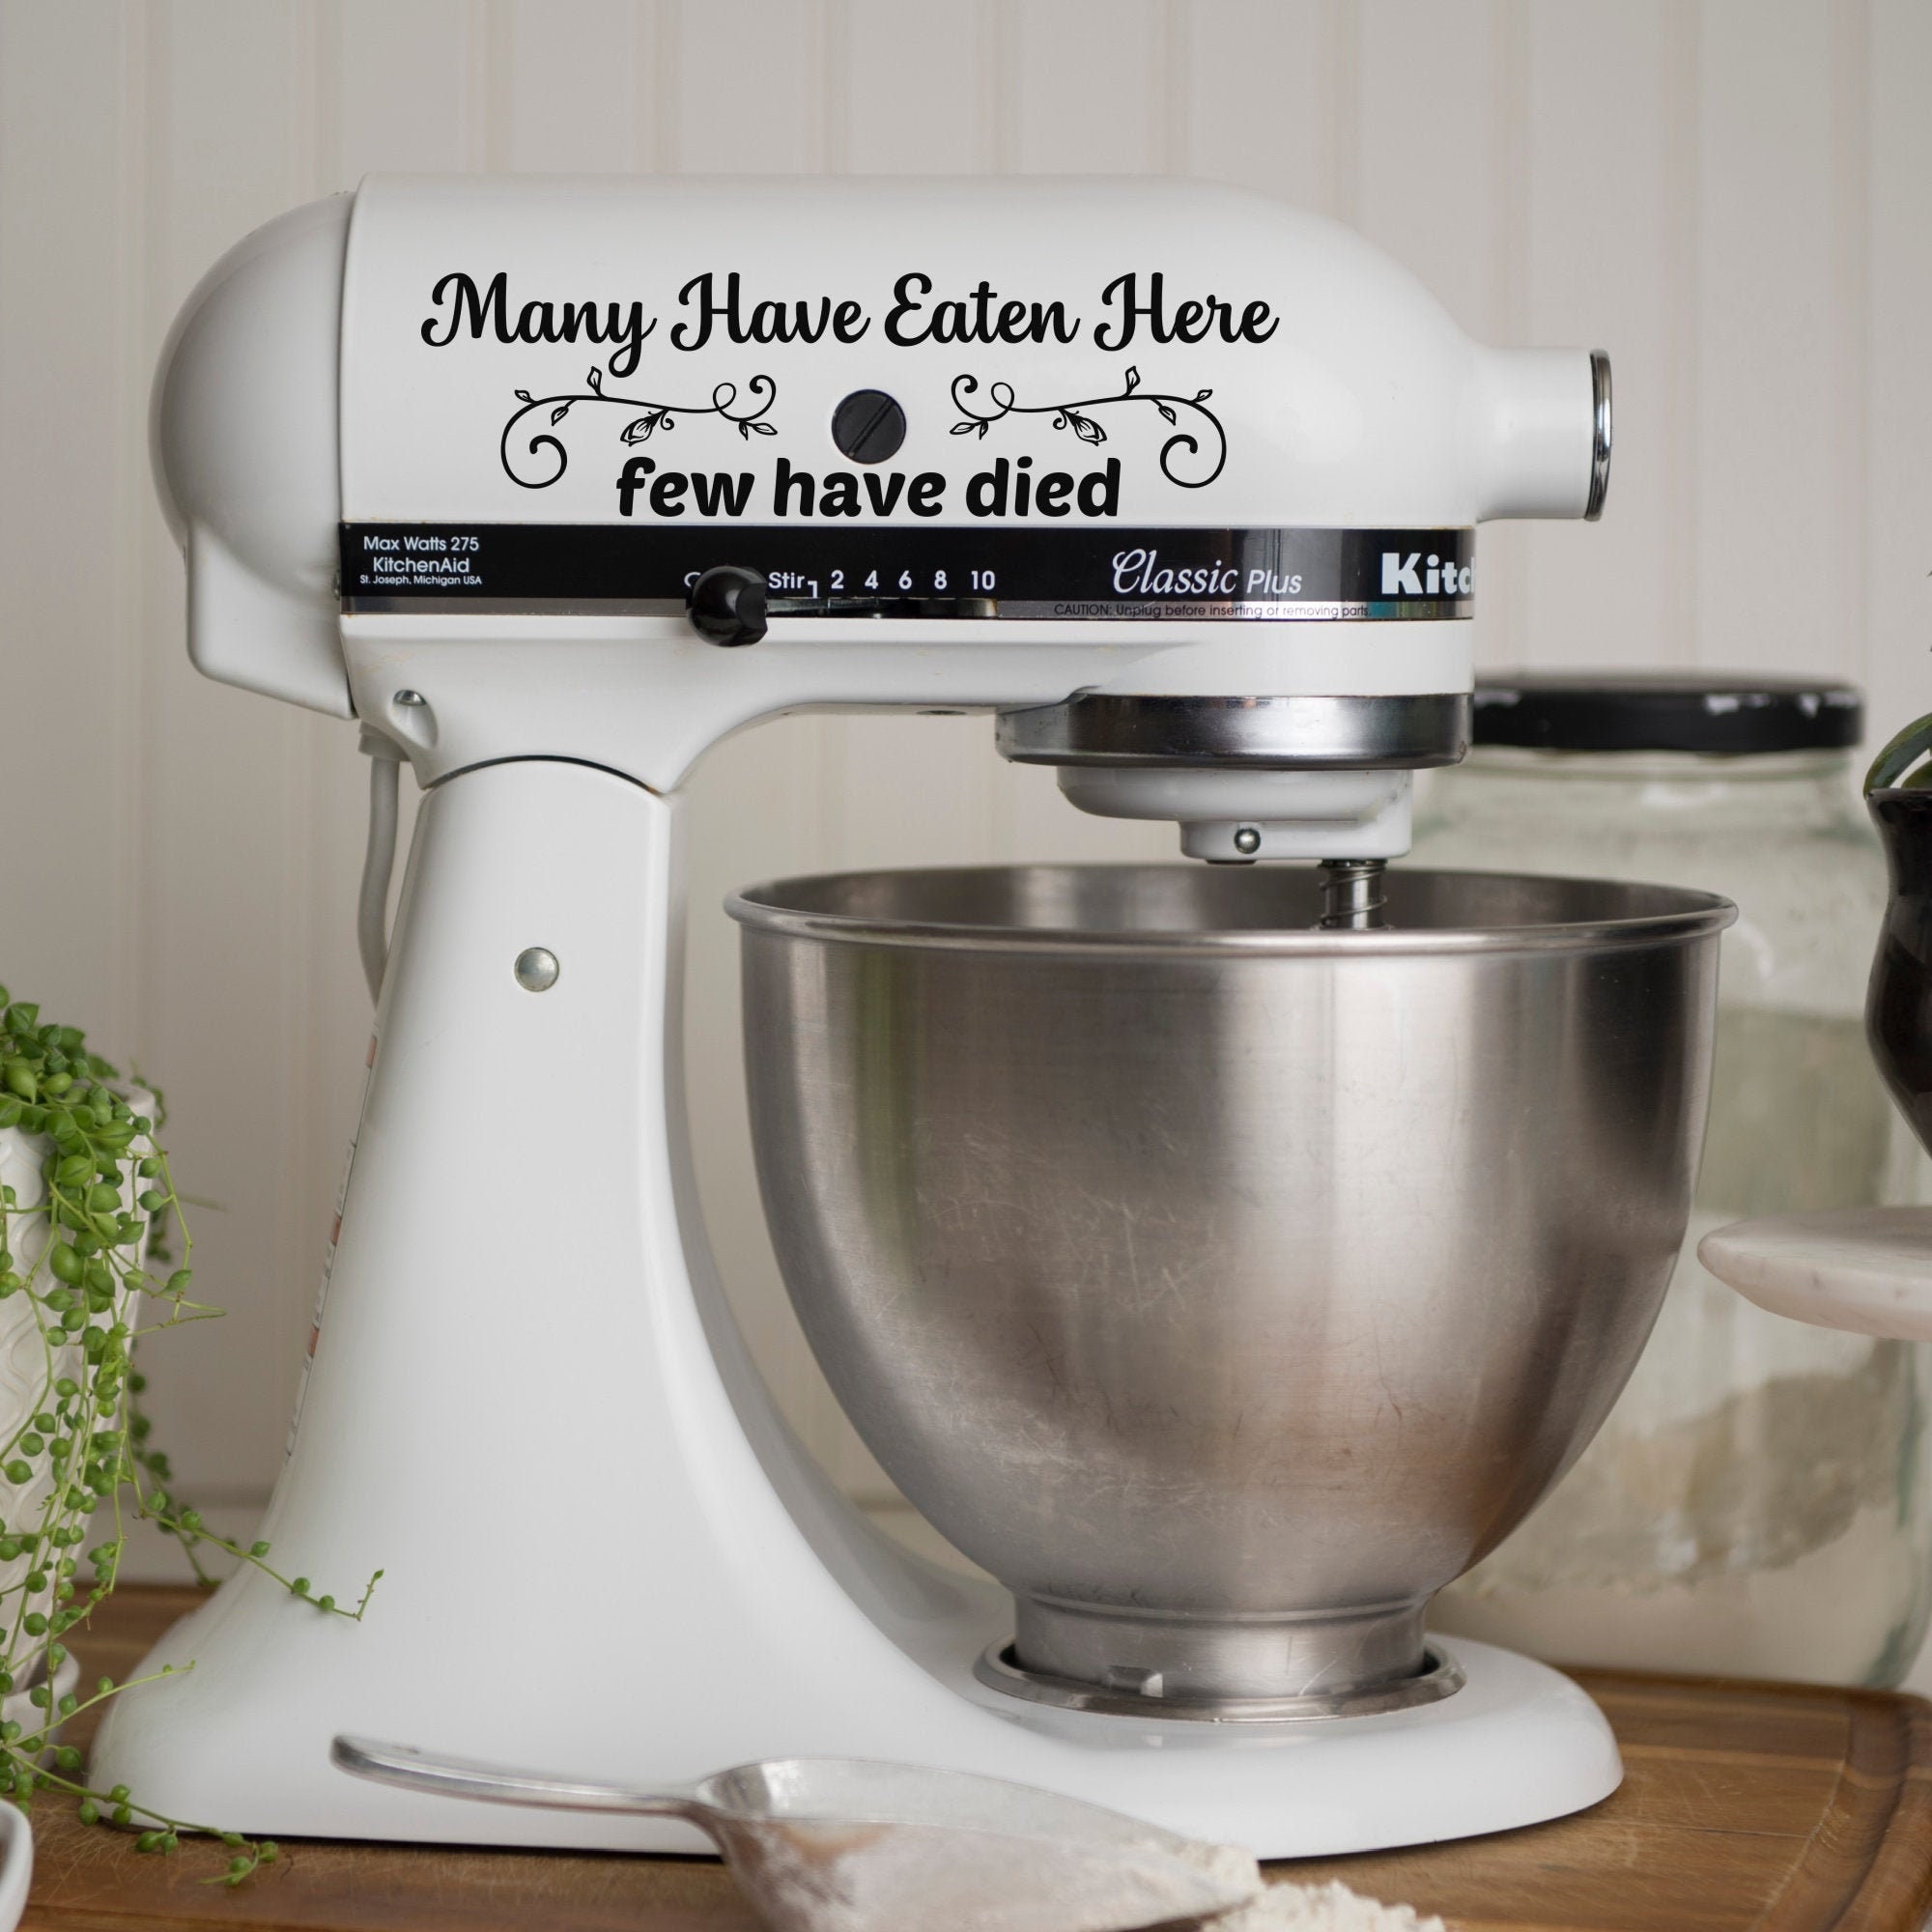 You Need a KitchenAid Stand Mixer Cover - Here's Why